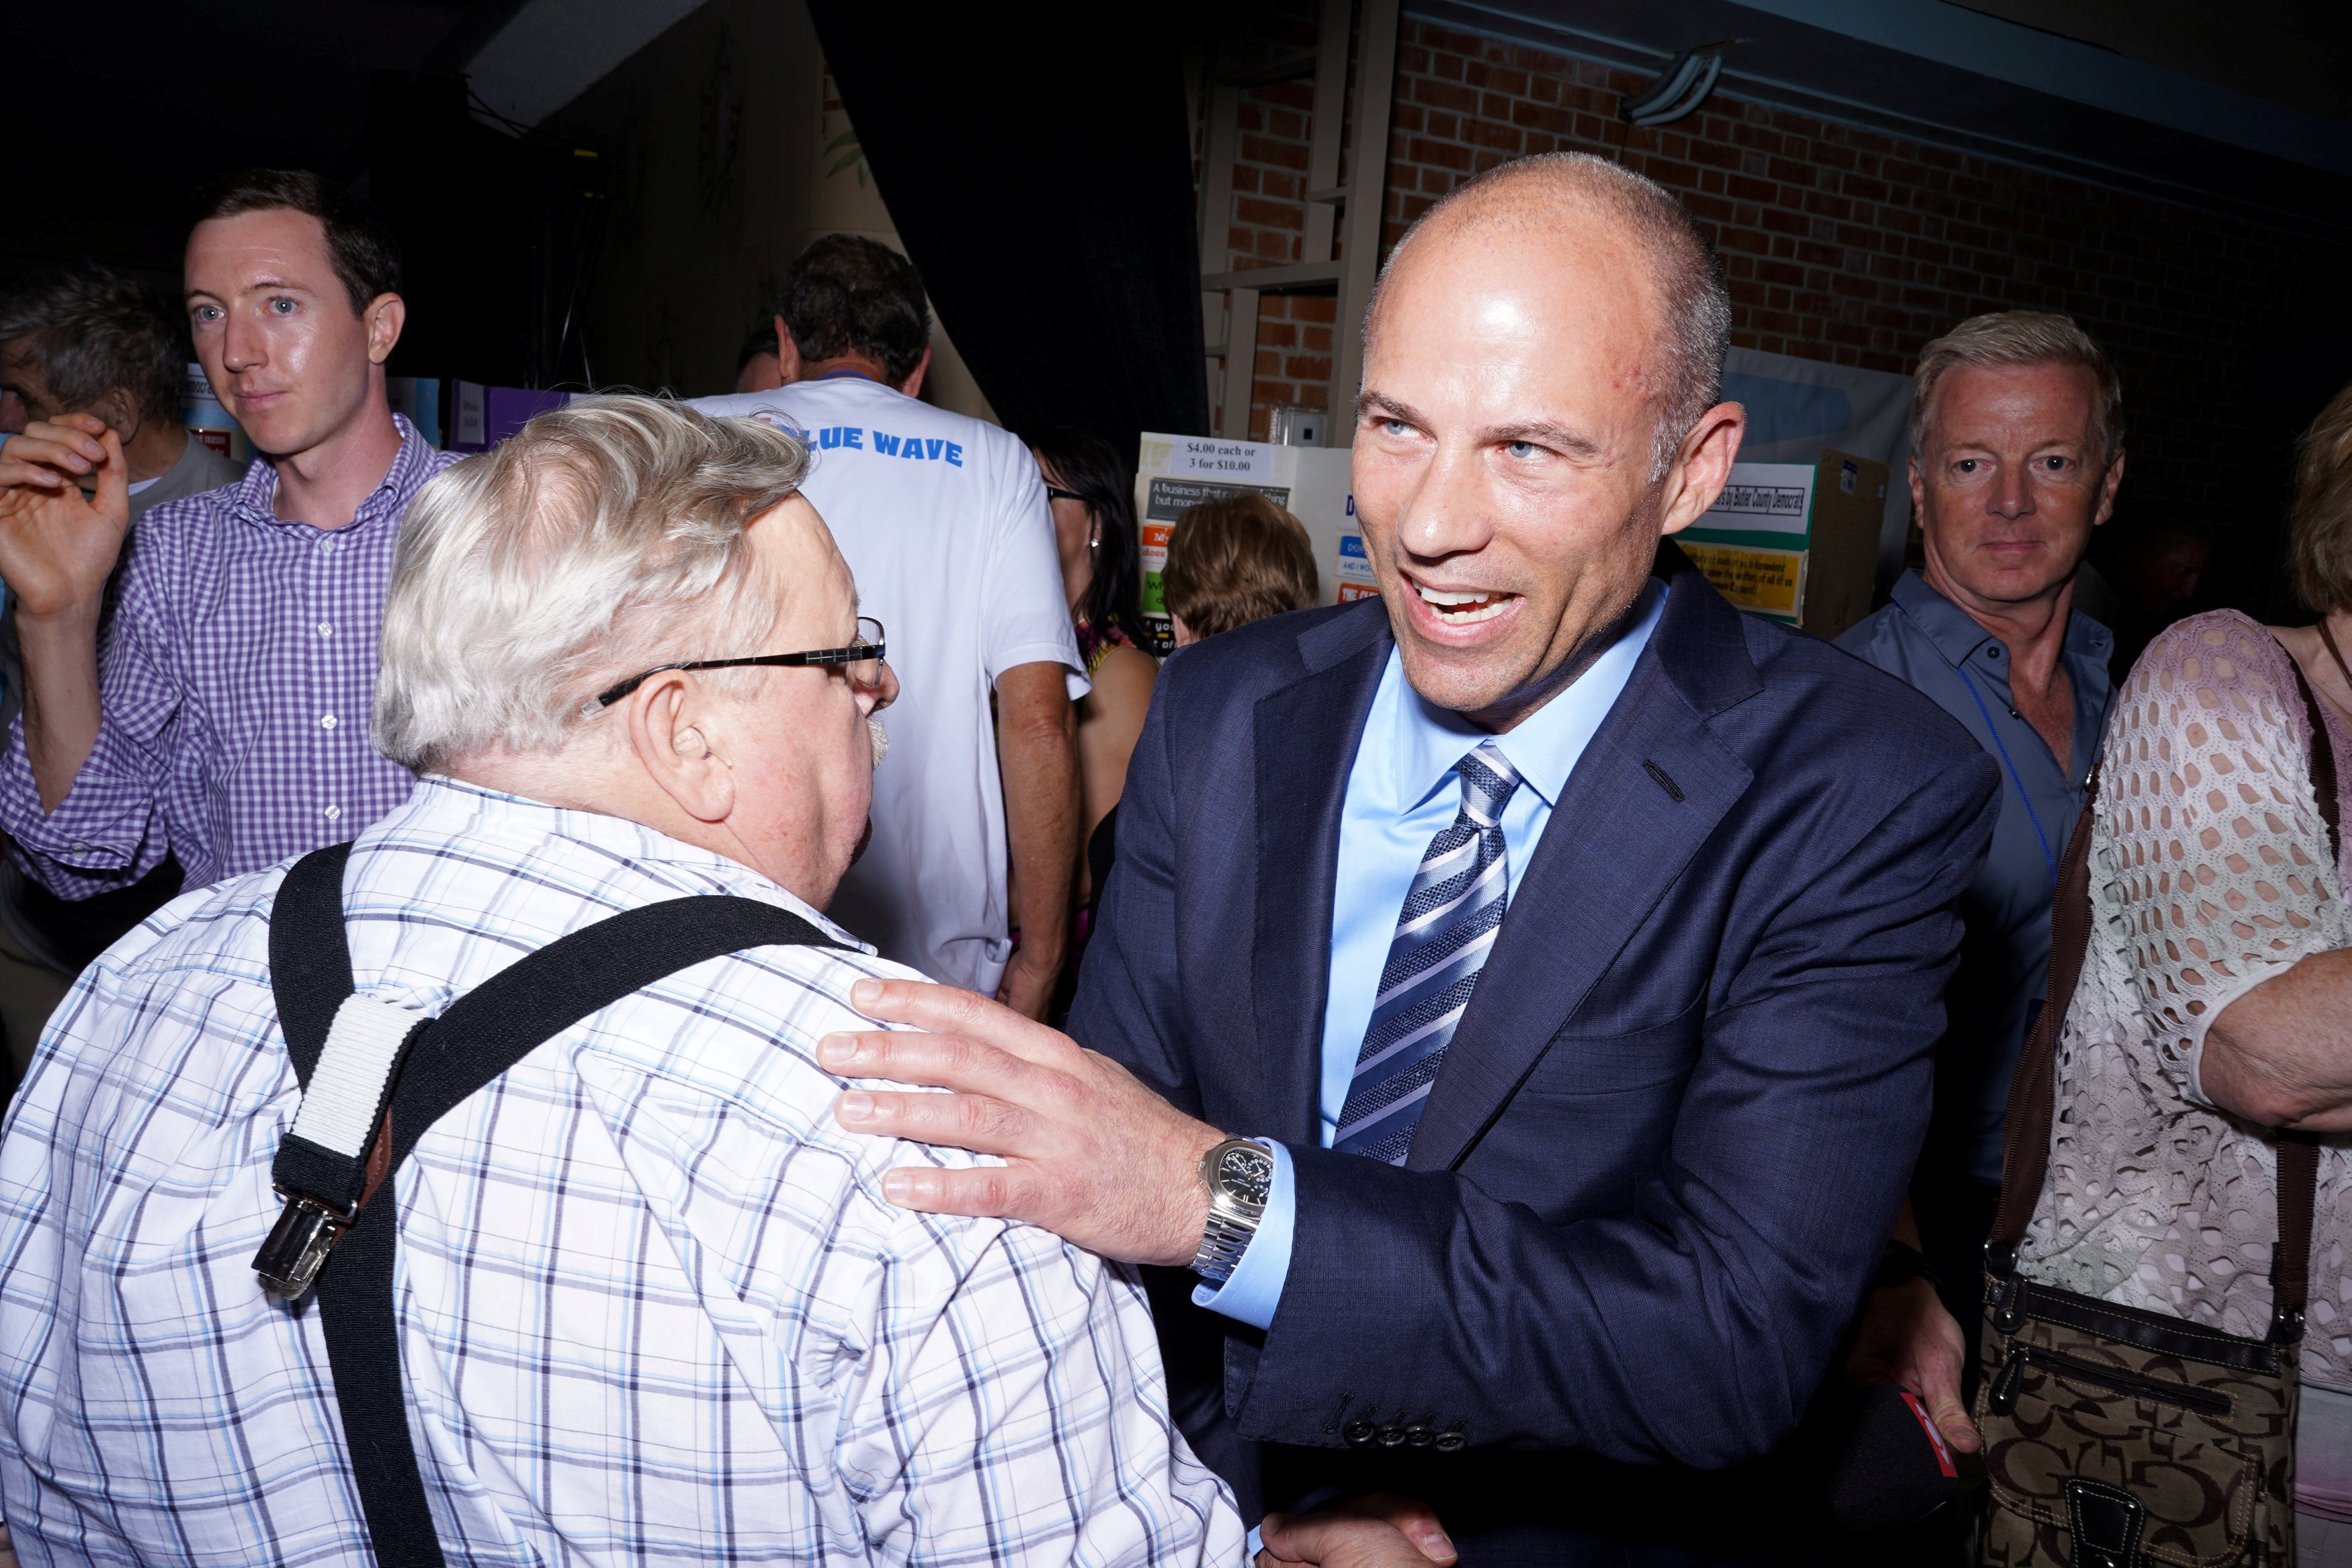 Michael Avenatti talks with supporters after speaking at the Iowa Democratic Wing Ding in Clear Lake, Iowa, U.S., August 10, 2018. Picture taken August 10, 2018. REUTERS/KC McGinnis - RC16EB375840